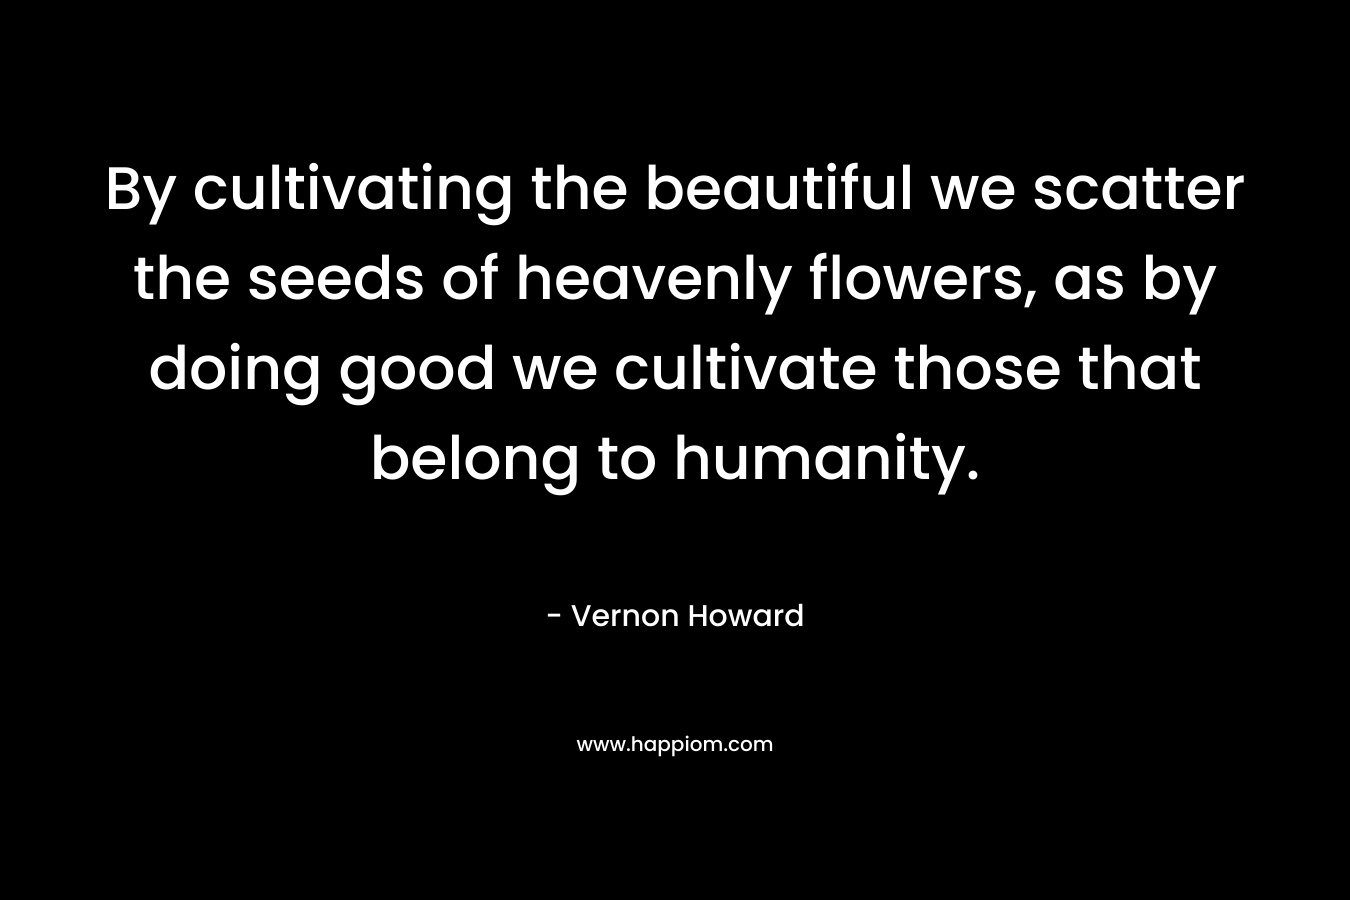 By cultivating the beautiful we scatter the seeds of heavenly flowers, as by doing good we cultivate those that belong to humanity. – Vernon Howard